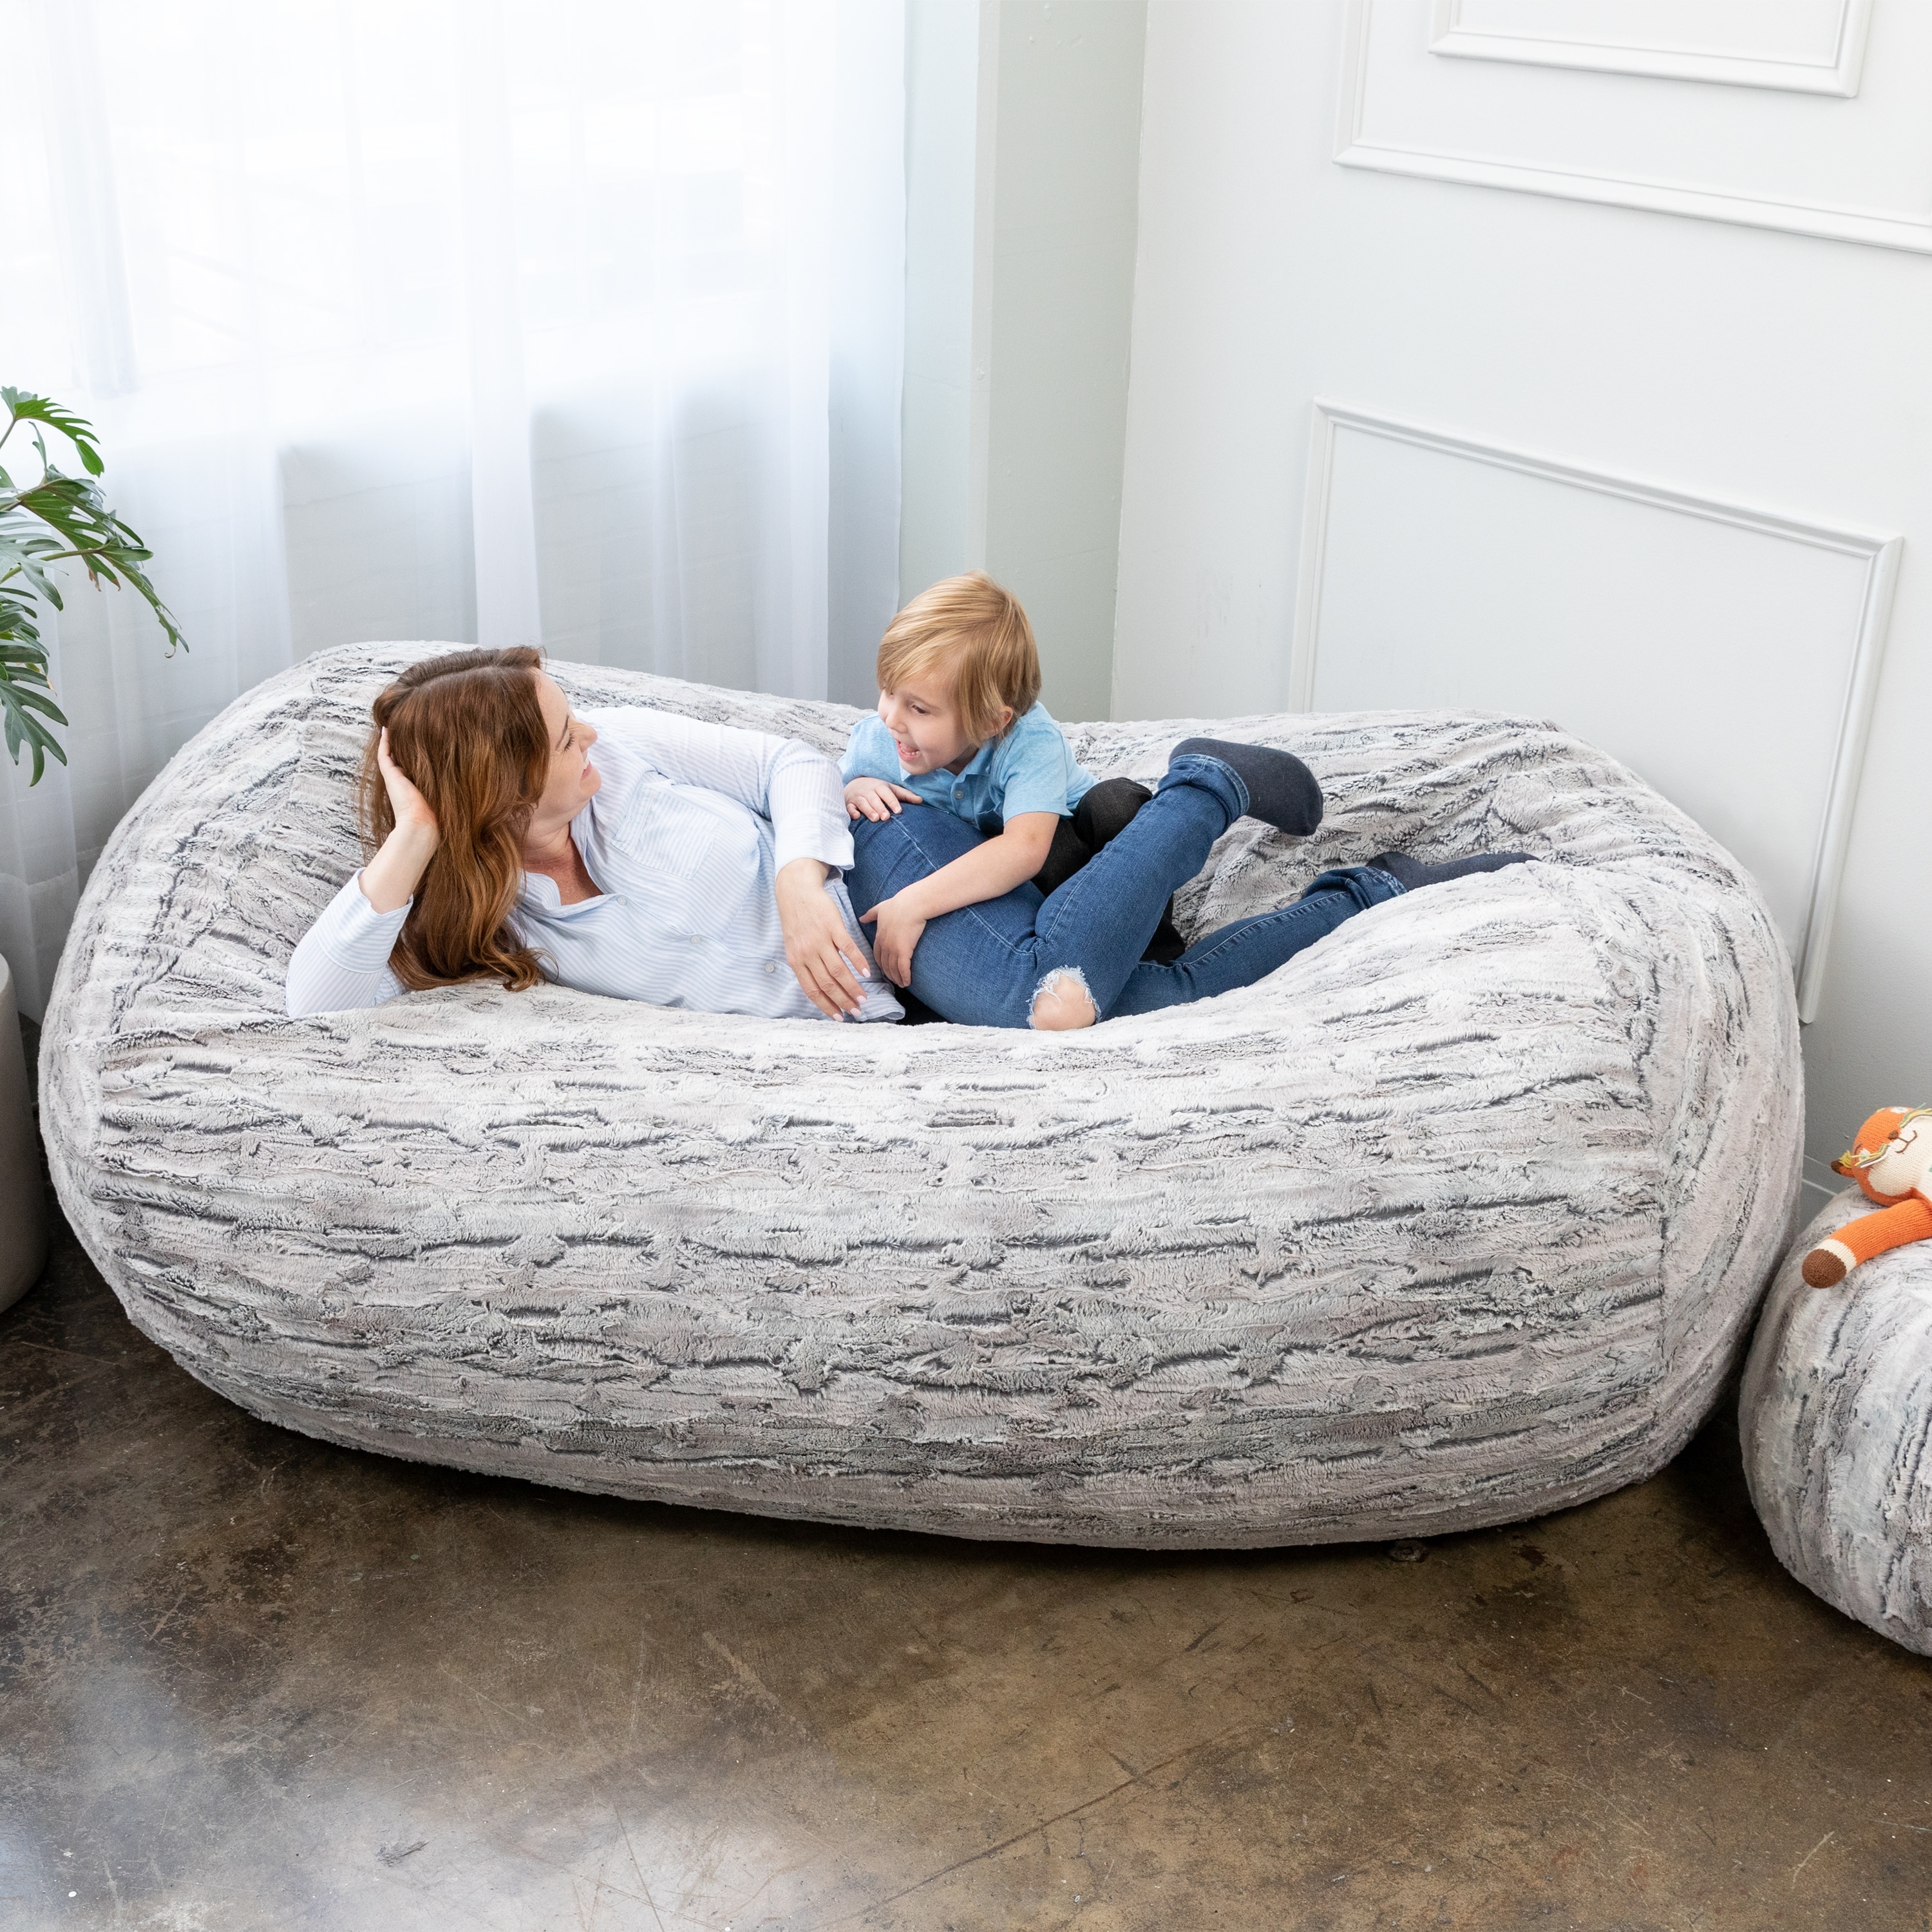 https://ak1.ostkcdn.com/images/products/is/images/direct/e684efdf0fcf7866b7f23e42c5ad21c92aeb5c4f/Jaxx-Grand-Lounger-7-Foot-Bean-Bag-Sofa---Luxe-Fur.jpg